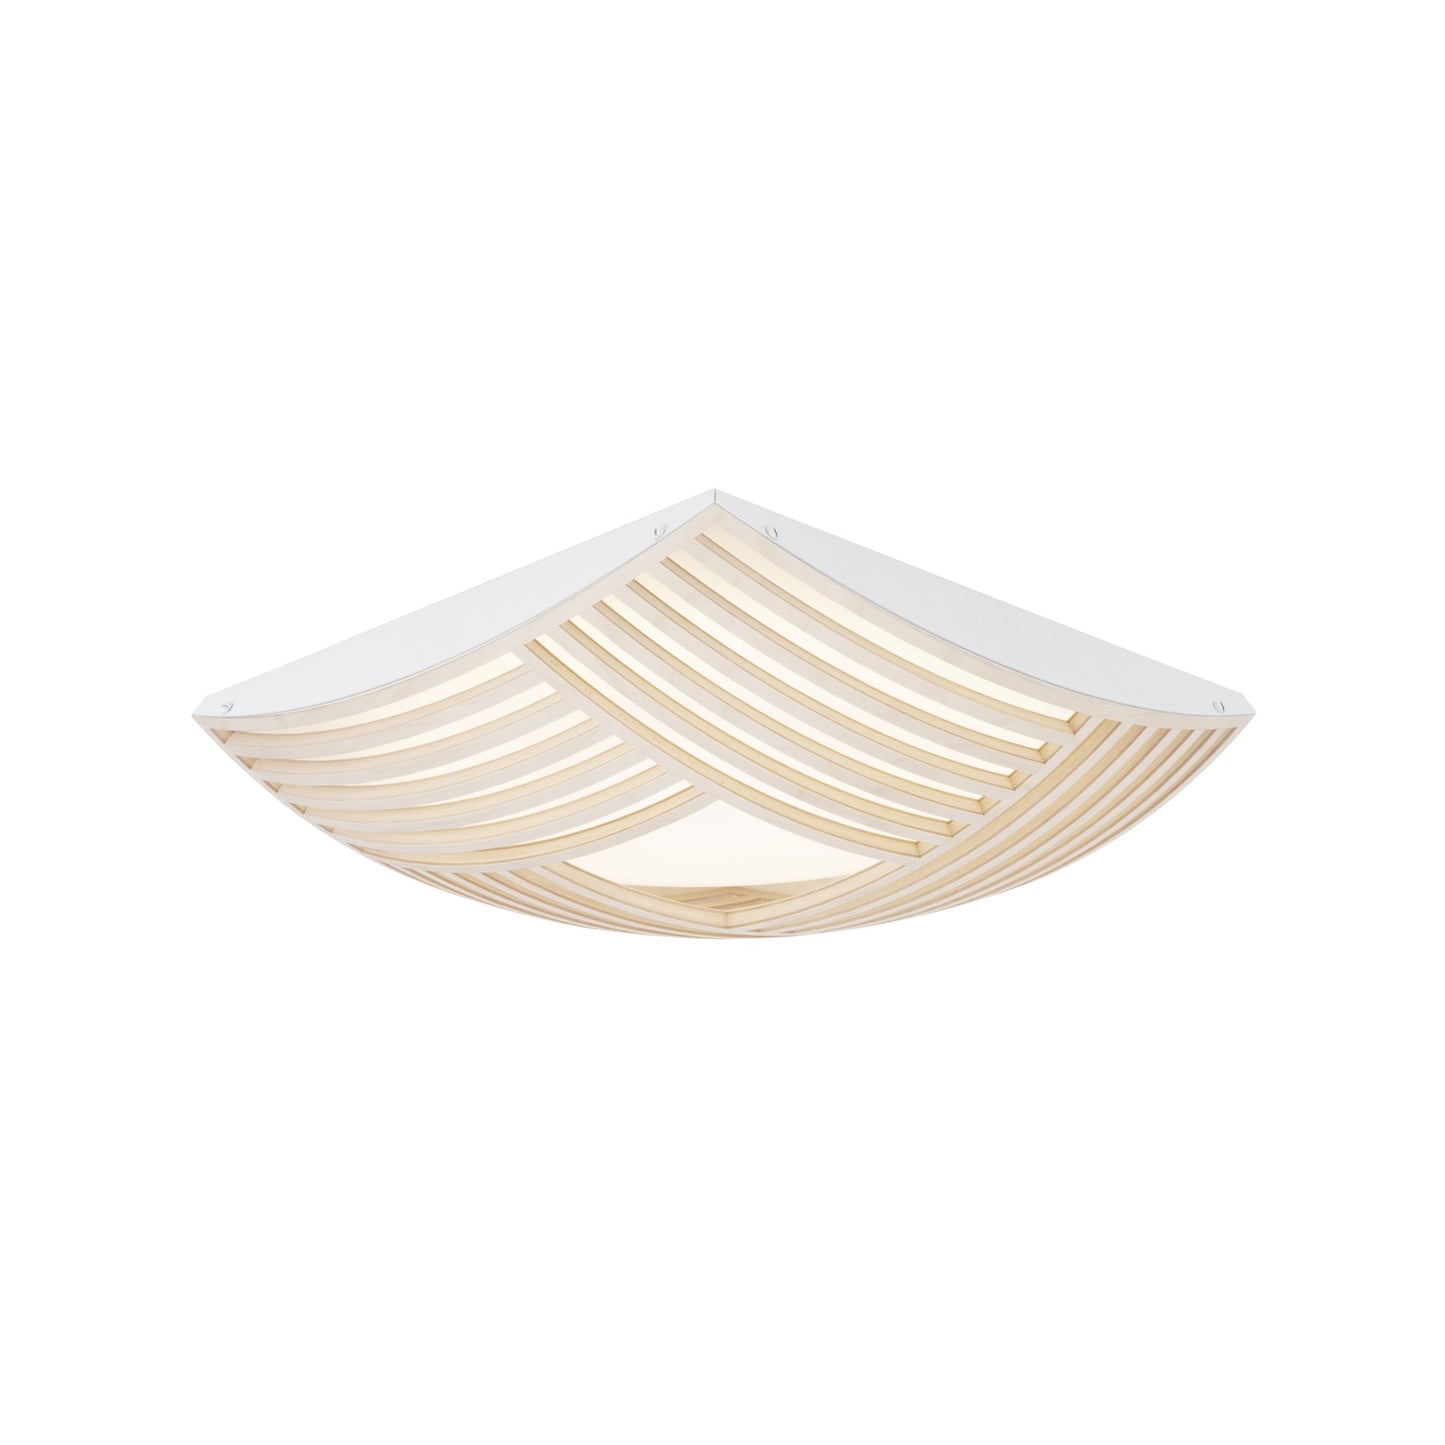 Kuulto 9101 Ceiling Light Small by Secto #Birch